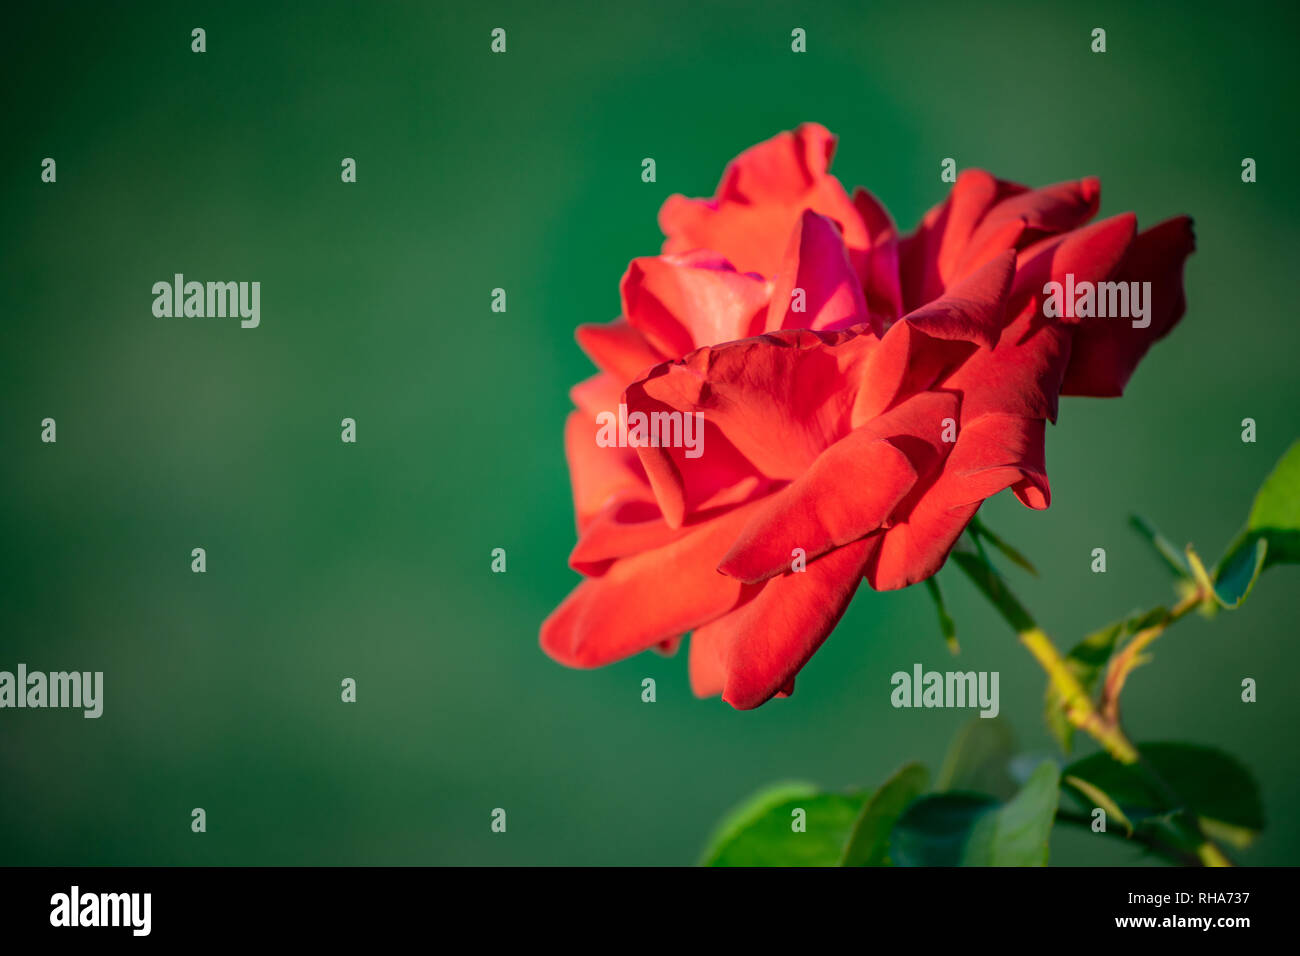 Close up on a single red rose, isolated, green background. Copy space for text. Stock Photo